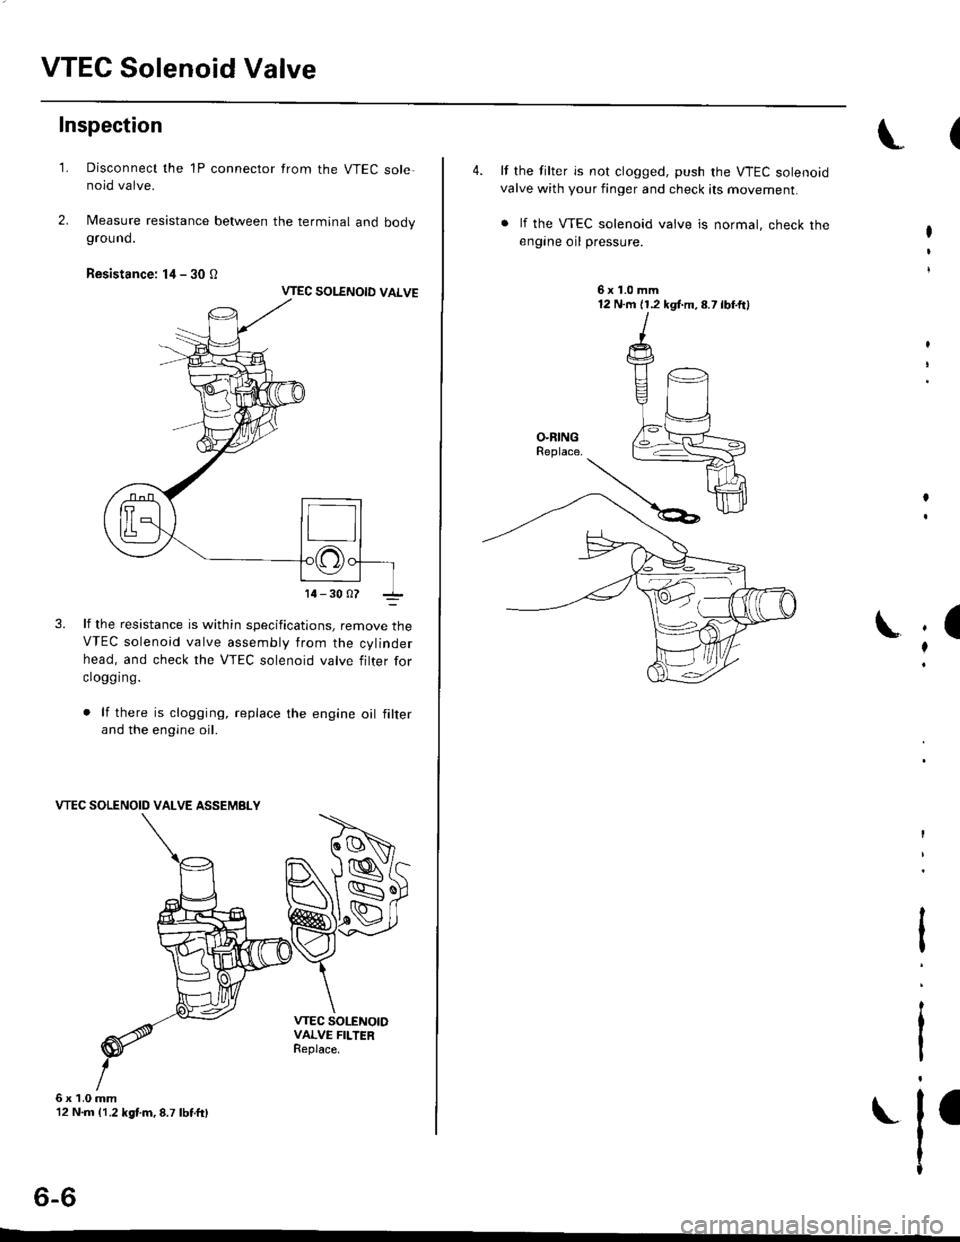 HONDA CIVIC 2000 6.G User Guide VTEC Solenoid Valve
Inspection
1.
6x1.0mm12 N.m 11.2 kgf.m,8.7 lbtft)
Disconnect the 1P connector from the VTEC sole-noid valve.
Measure resistance between the terminal and bodyground.
Resistance: l4 